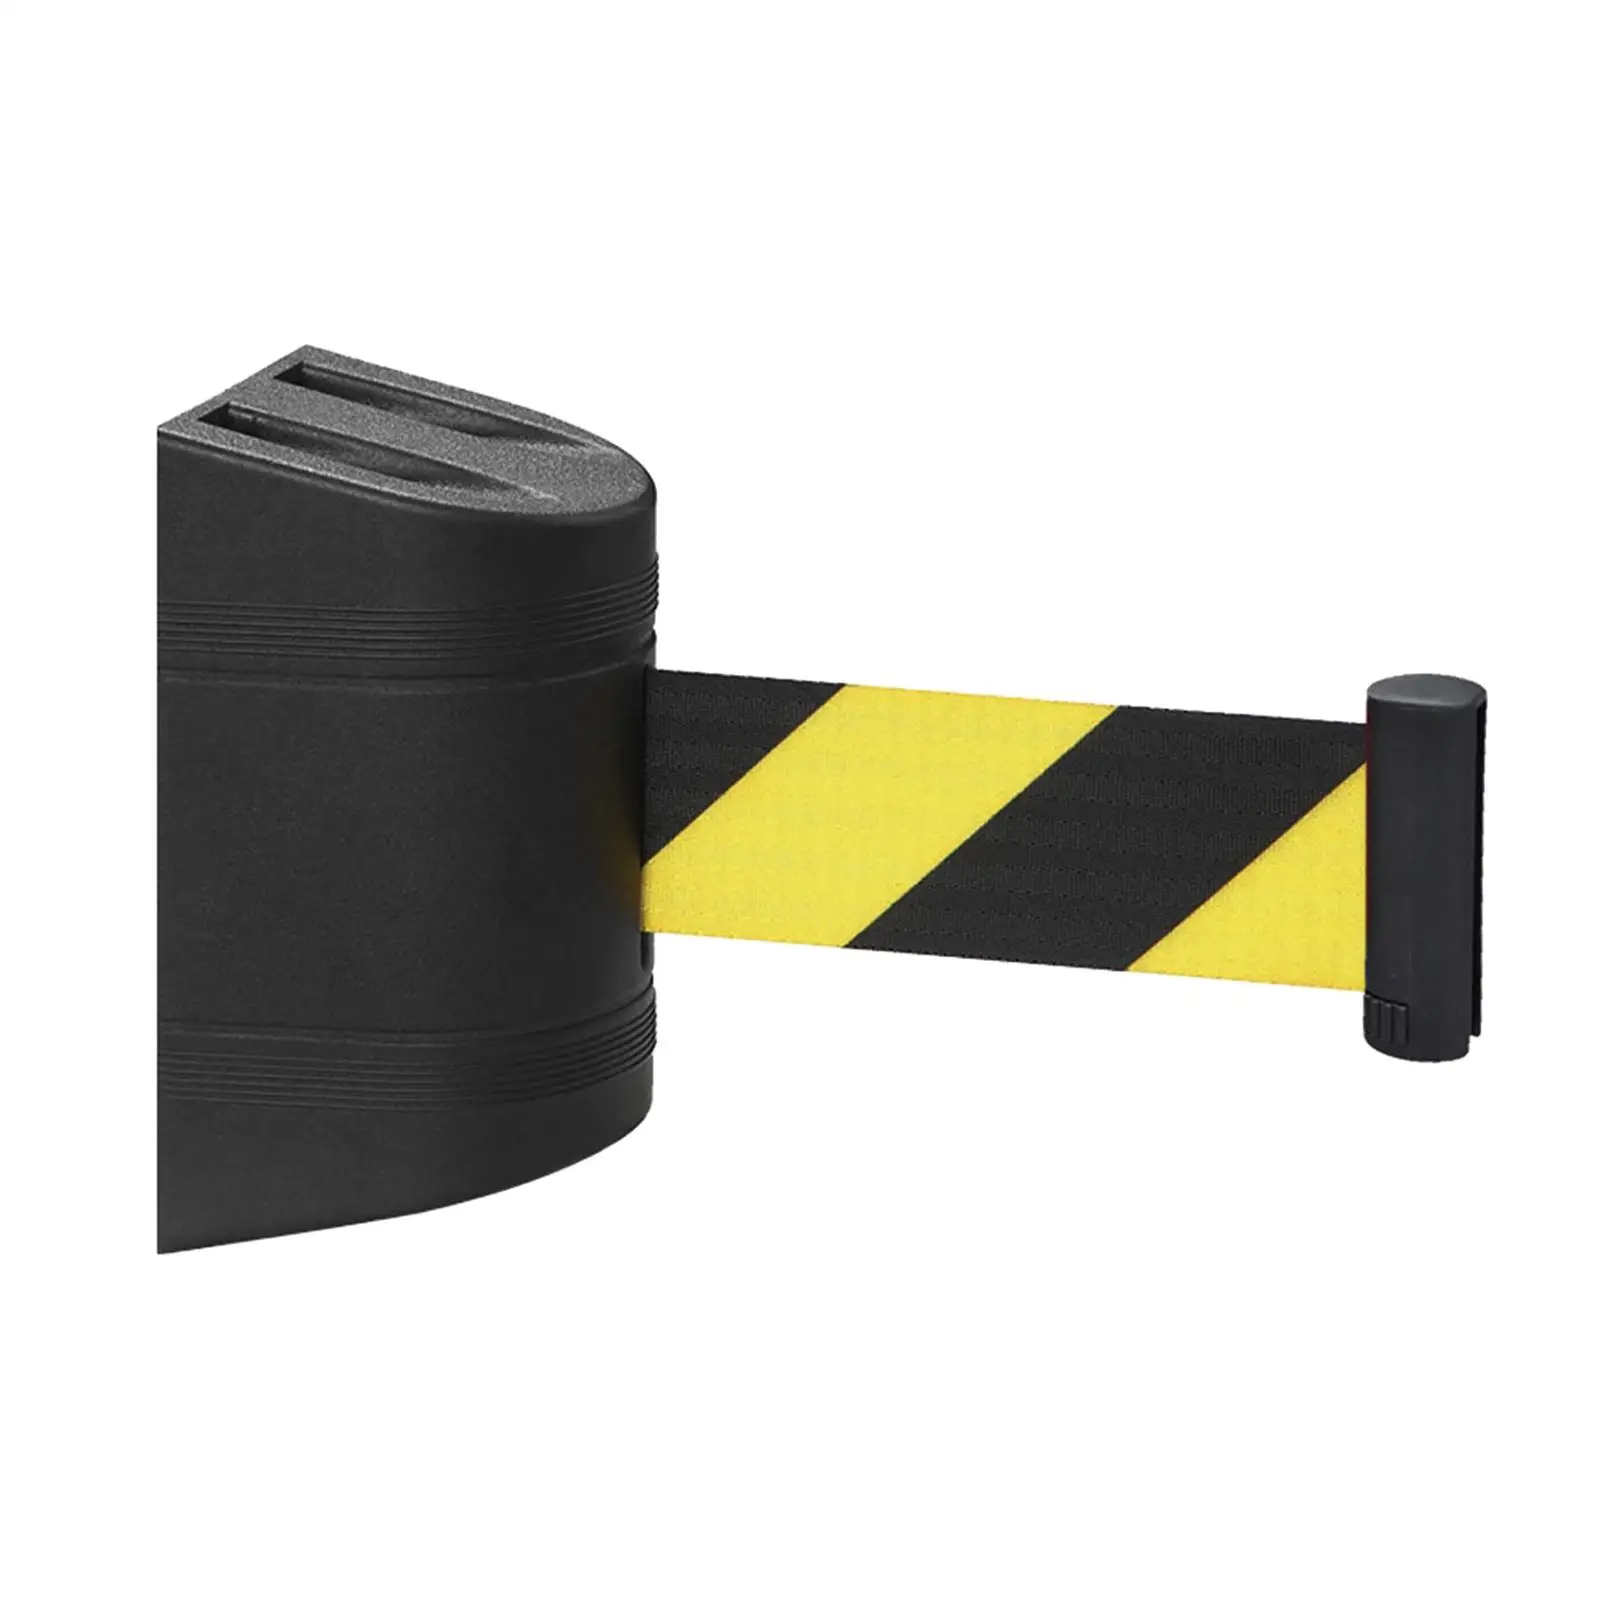 Retractable Barrier Belt Fixed Wall Mount Retractable Belt Barrier for warehouse Aisle Sporting Events Corridor Elevator